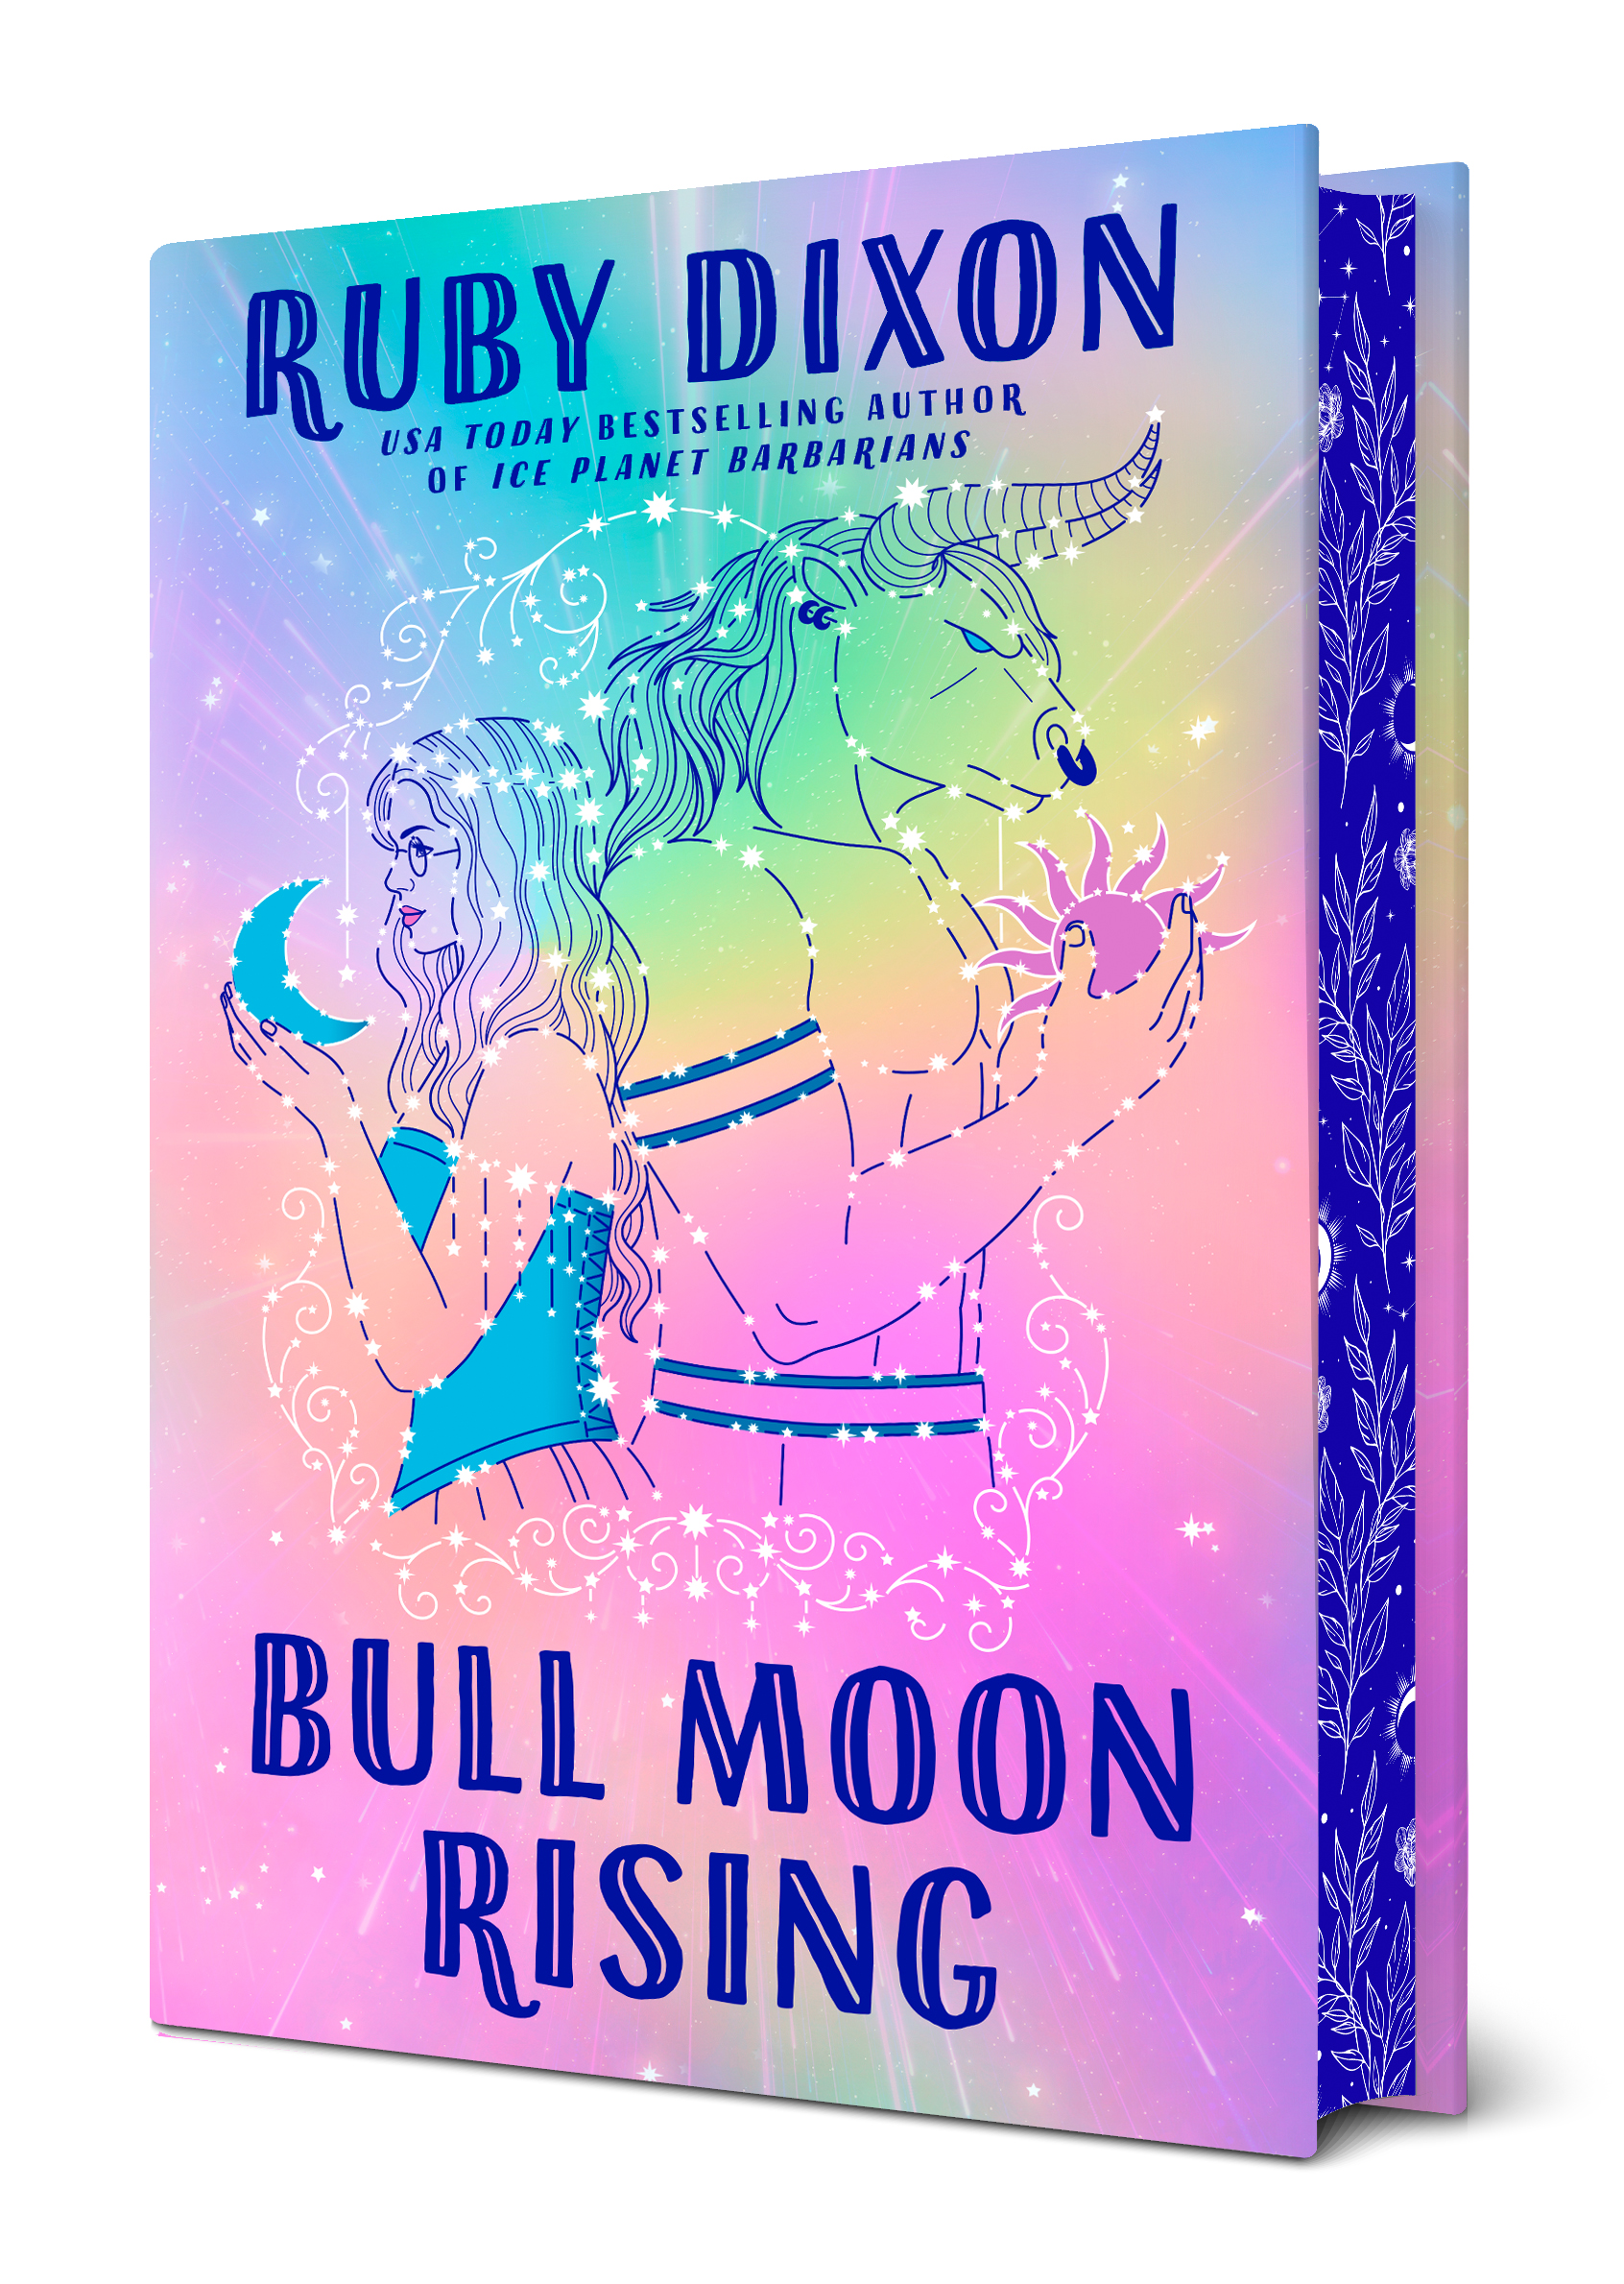 Bull Moon Rising — First Edition Hardcover